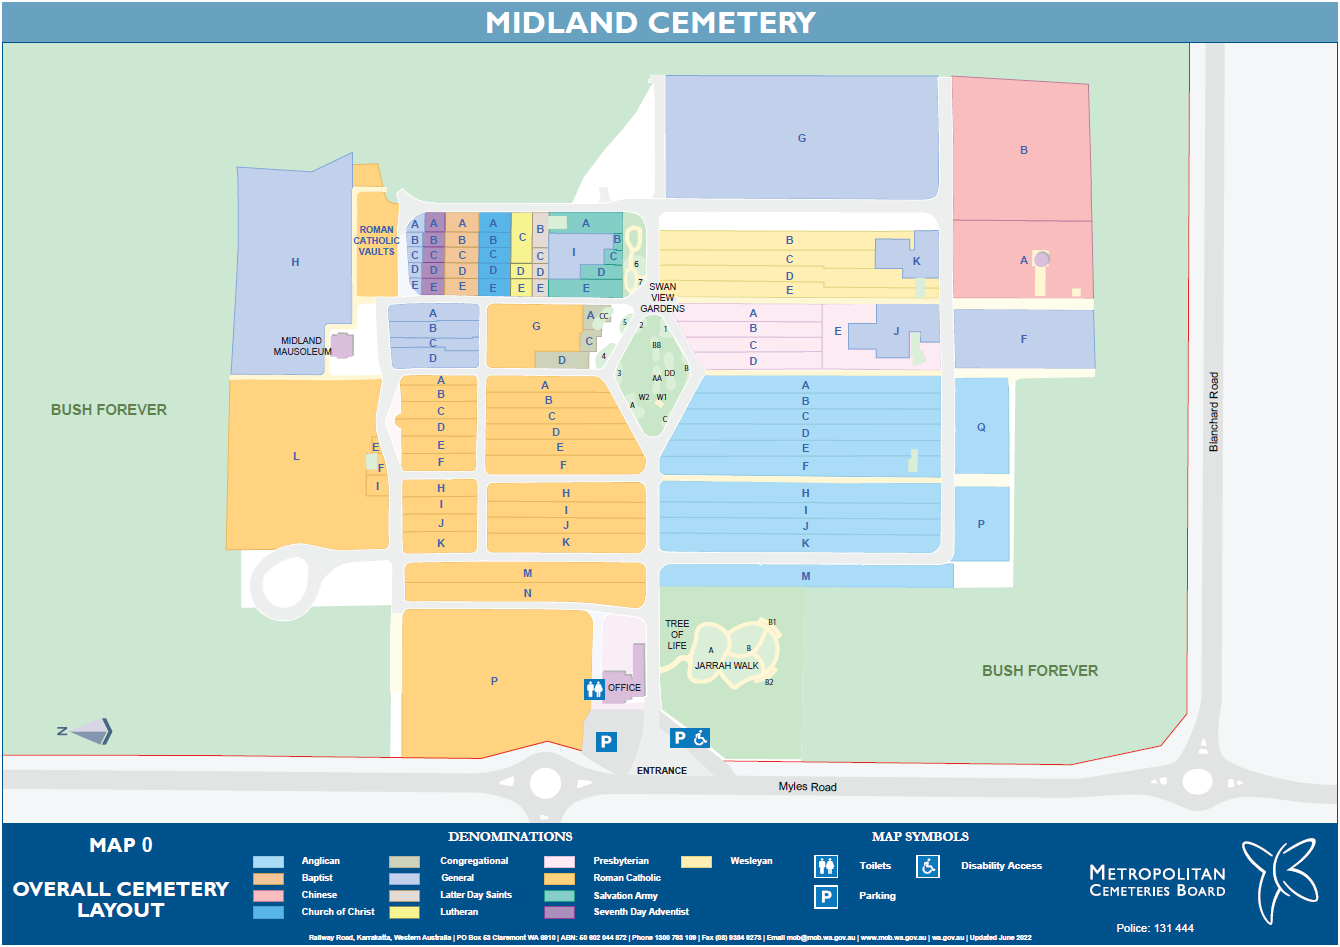 Midland Cemetery map showing all the sections